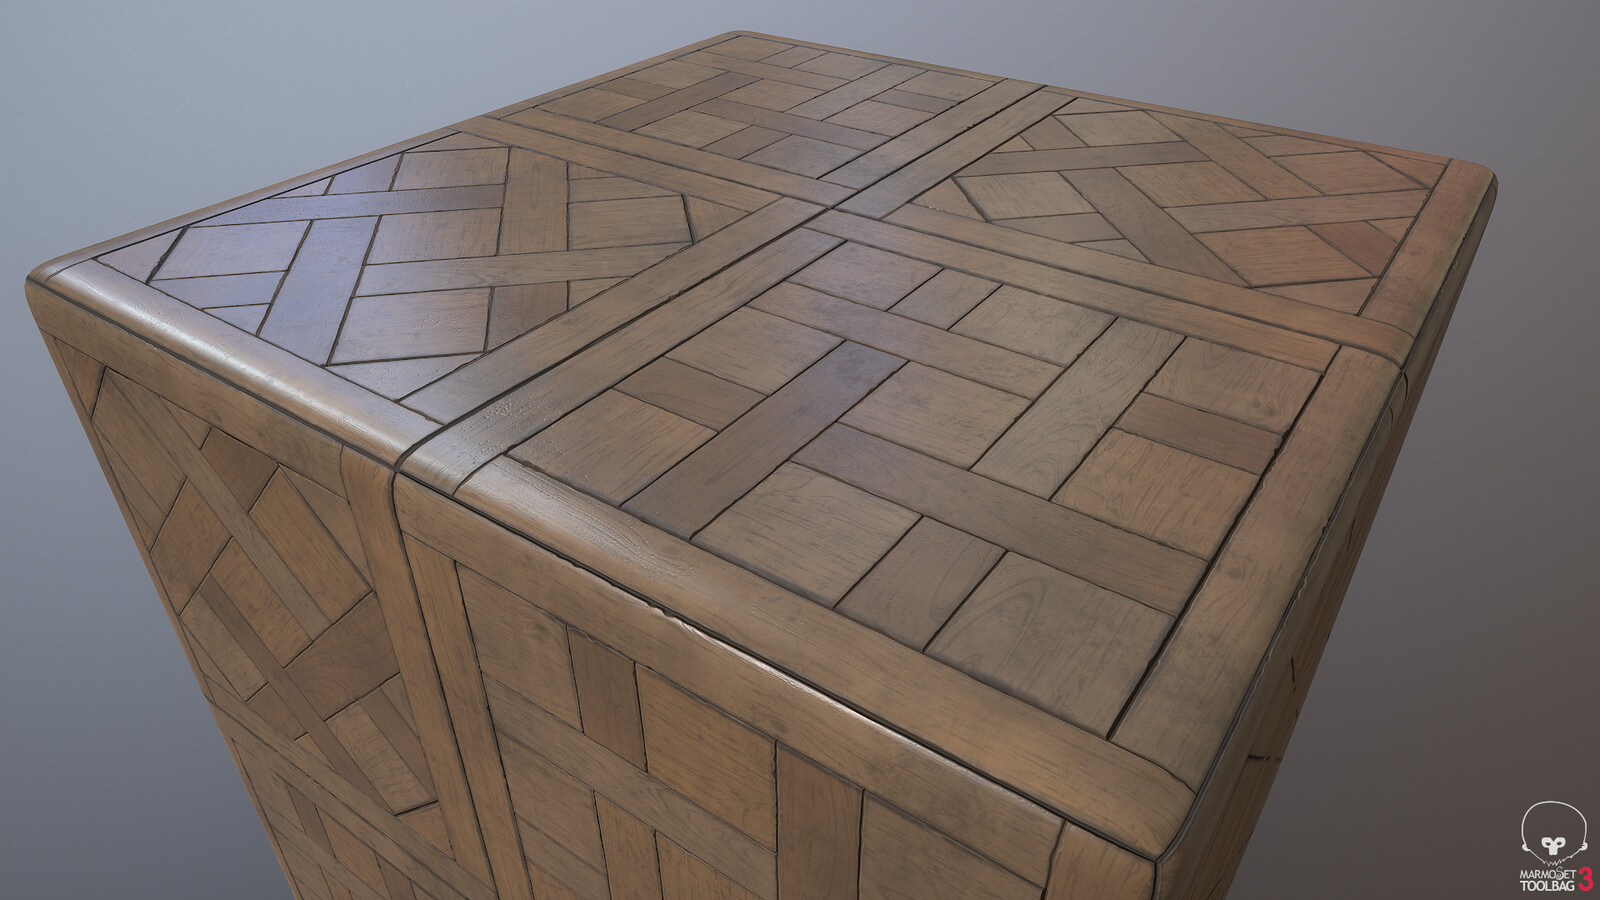 This project is my first deep dive into Substance Designer. Here's the floor texture I created.